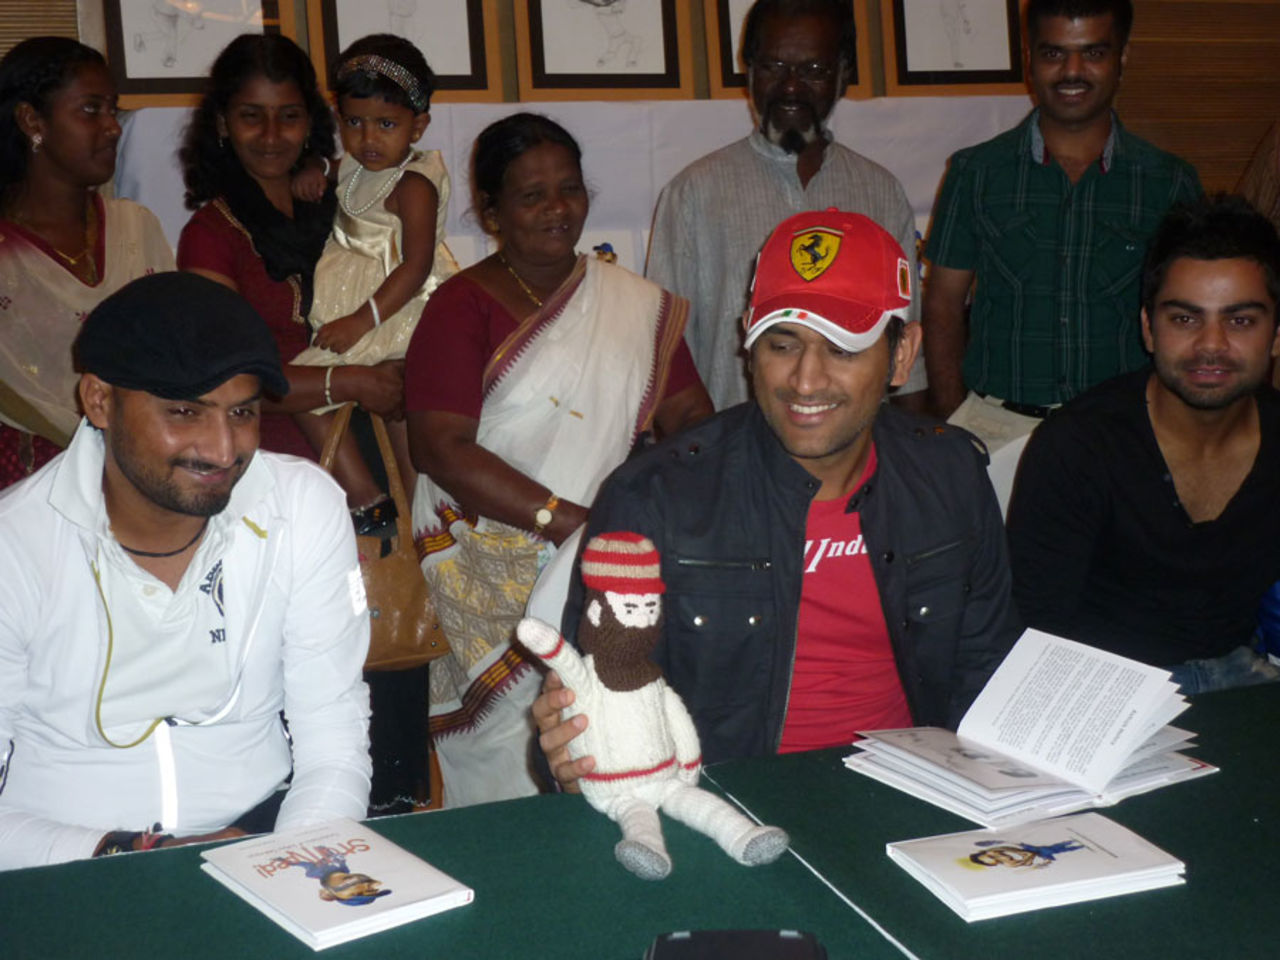 MS Dhoni, sitting between Harbhajan Singh and Virat Kohli holds a WG Grace doll at a book launch, Bangalore, February 28, 2011